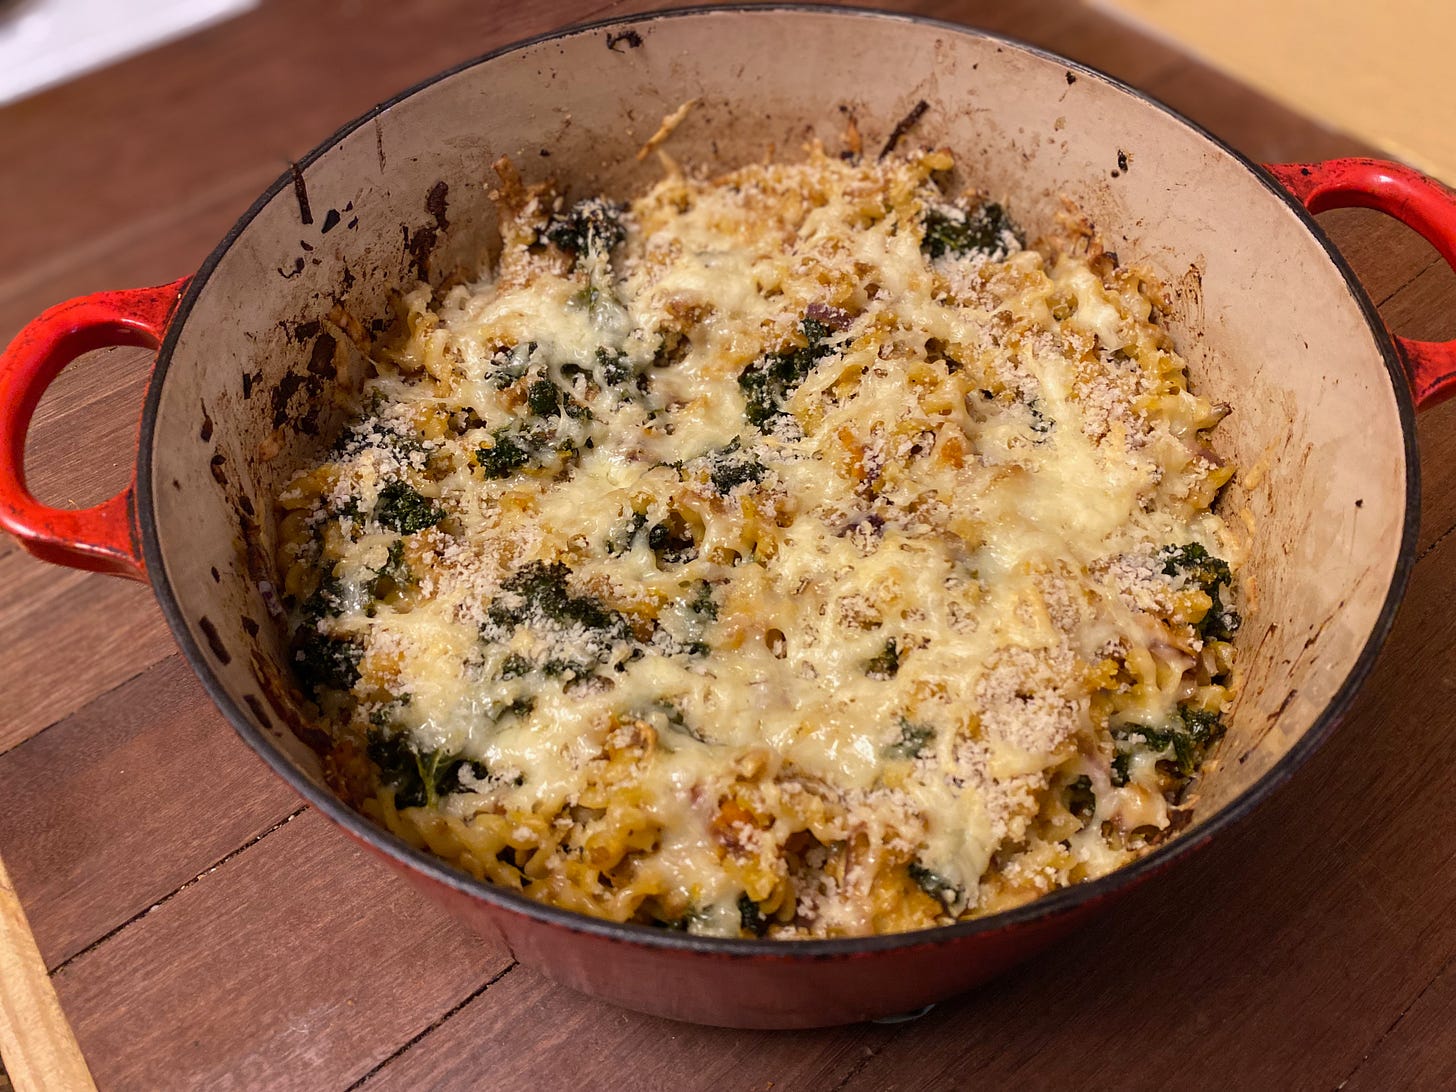 A large dish of baked pasta, covered with melty cheese, sits on a wooden counter.